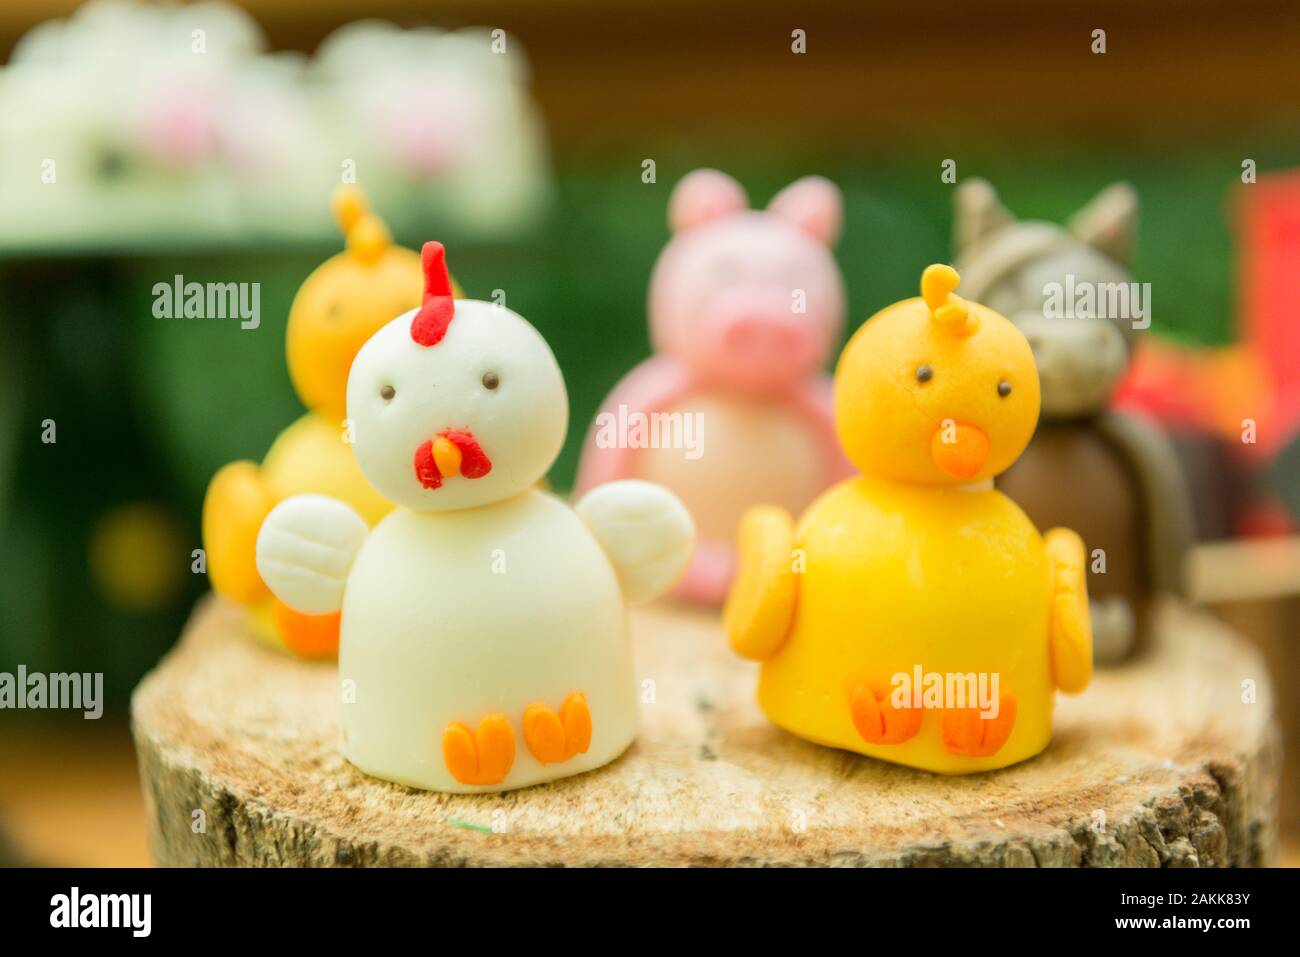 Kids Party Decoration - Farm Theme. Shaped candy personalized. Cake table detail. Handmade sweets with great care. Childhood and joy concept. Copy spa Stock Photo